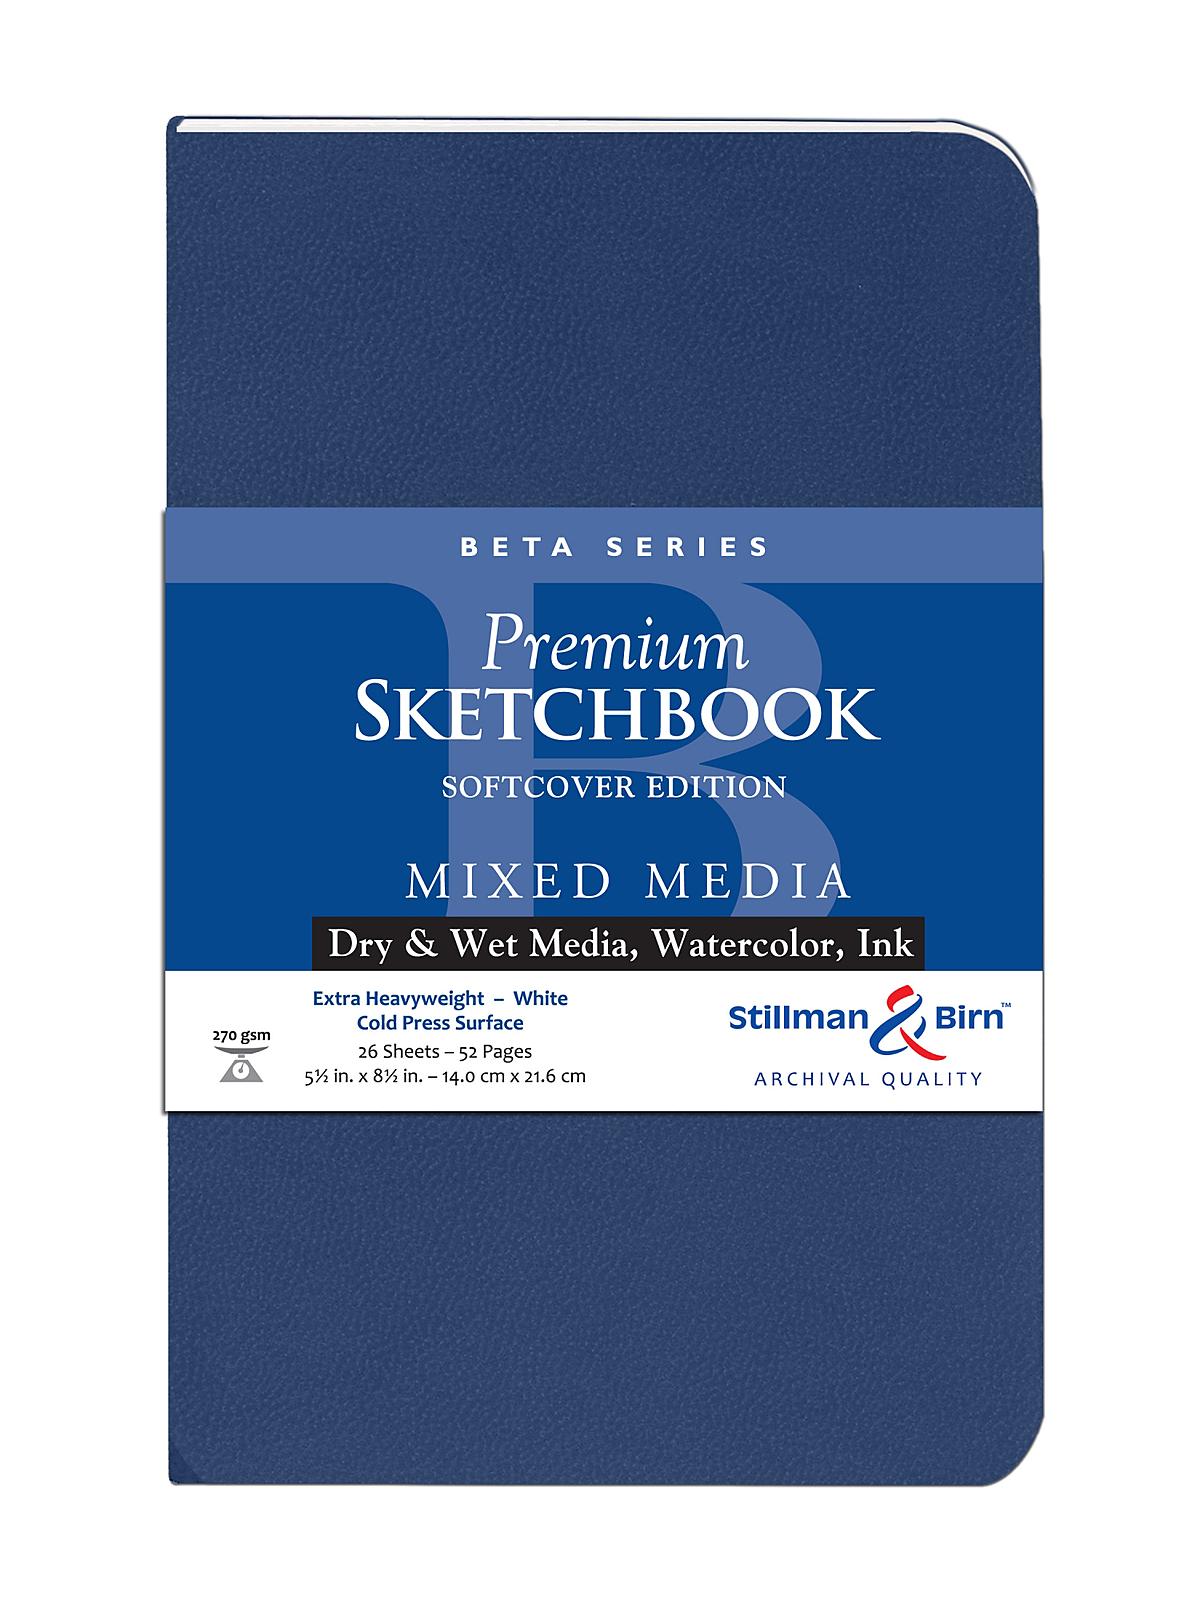 Beta Series Softcover Sketchbook 5.5 In. X 8.5 In. Portrait 56 Pages